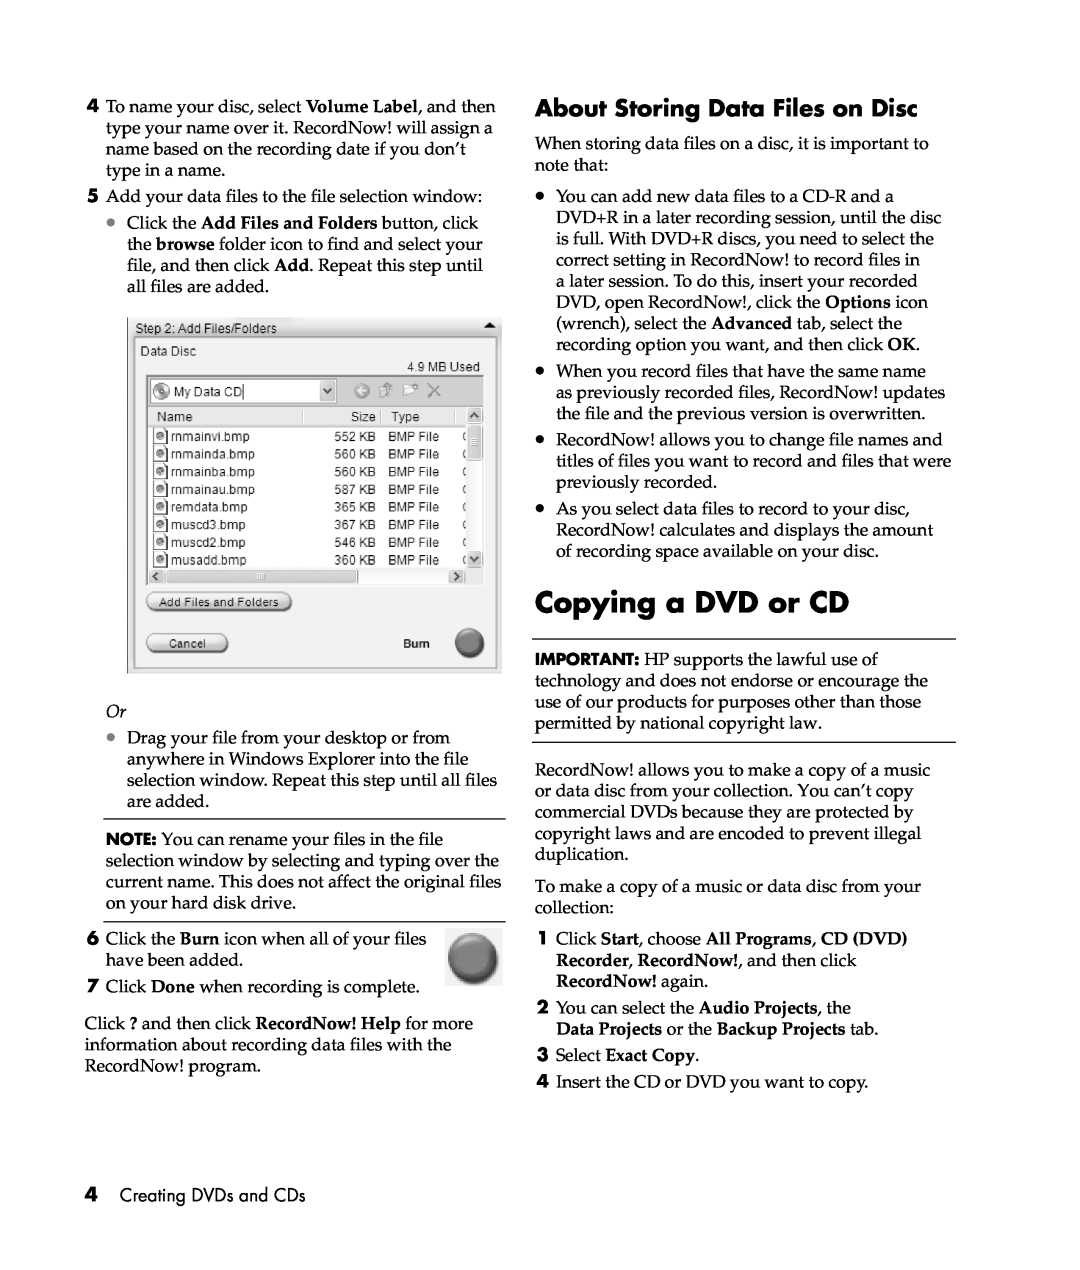 HP m376n, m476n, m470n, m390n, m400y (D7222P), m385c Copying a DVD or CD, About Storing Data Files on Disc, Select Exact Copy 